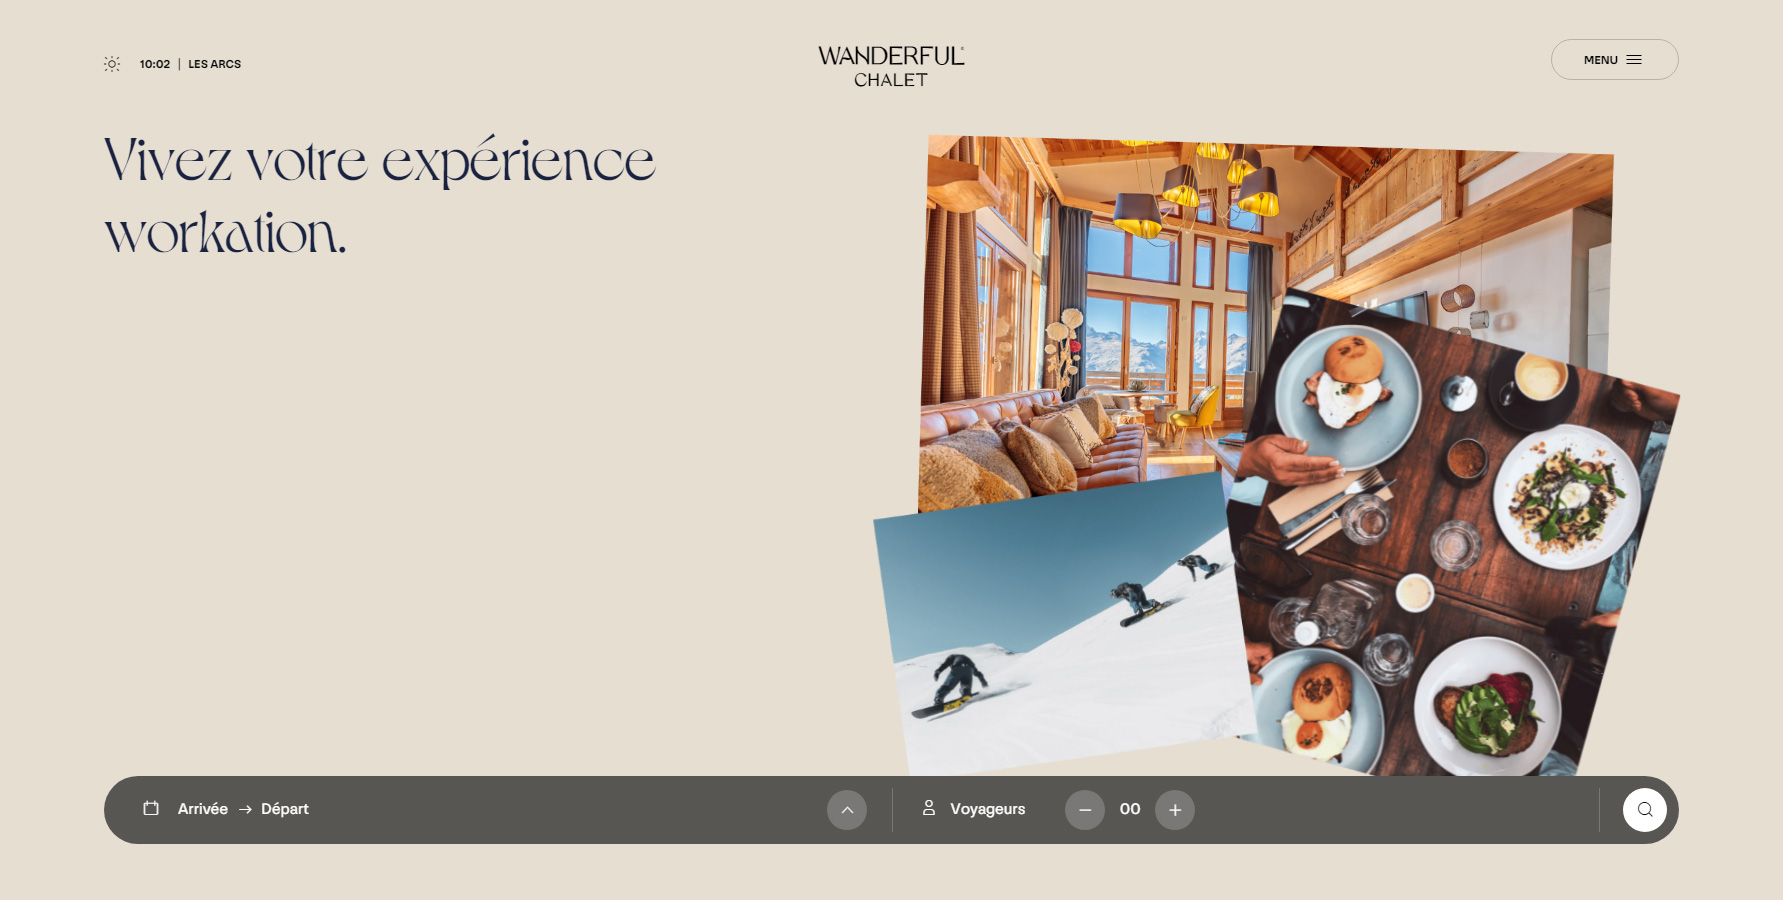 Wanderful Chalet - Website of the Day